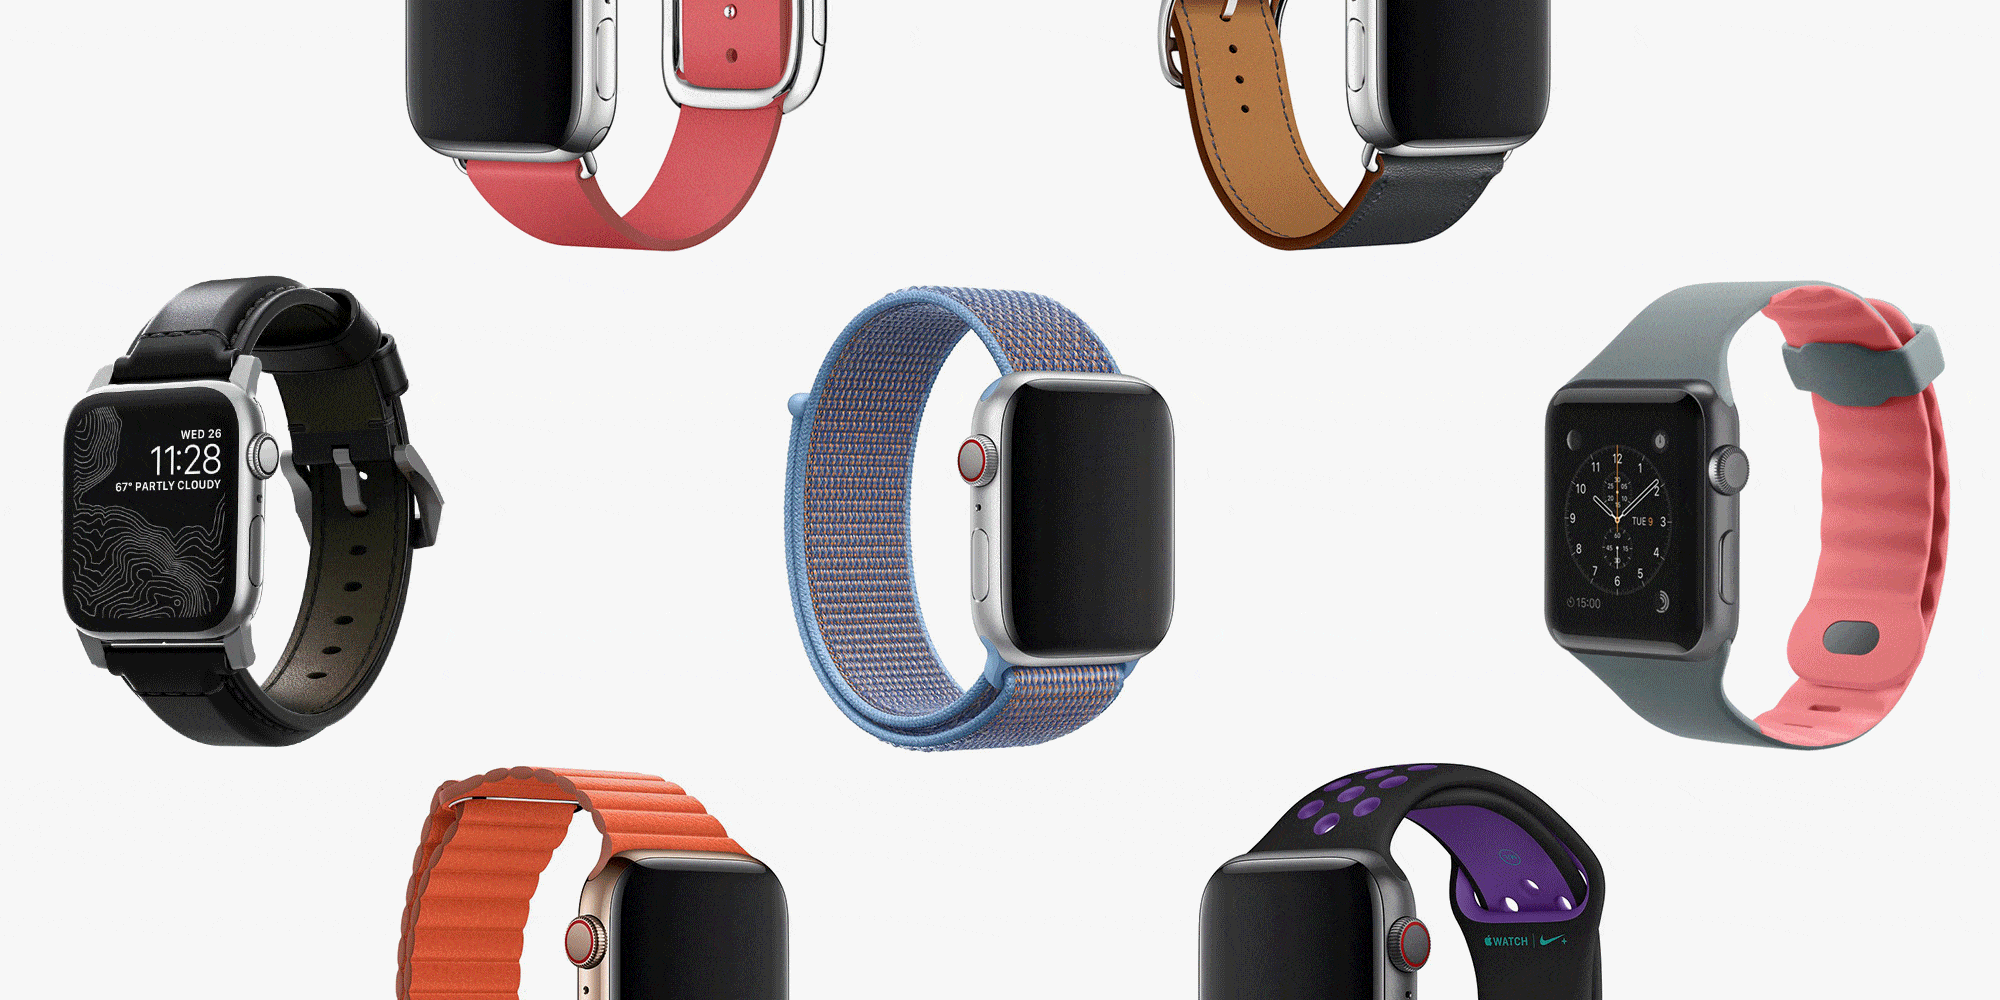 20 Best Apple Watch Replacement Bands ideas  apple watch replacement bands,  apple watch, watch bands